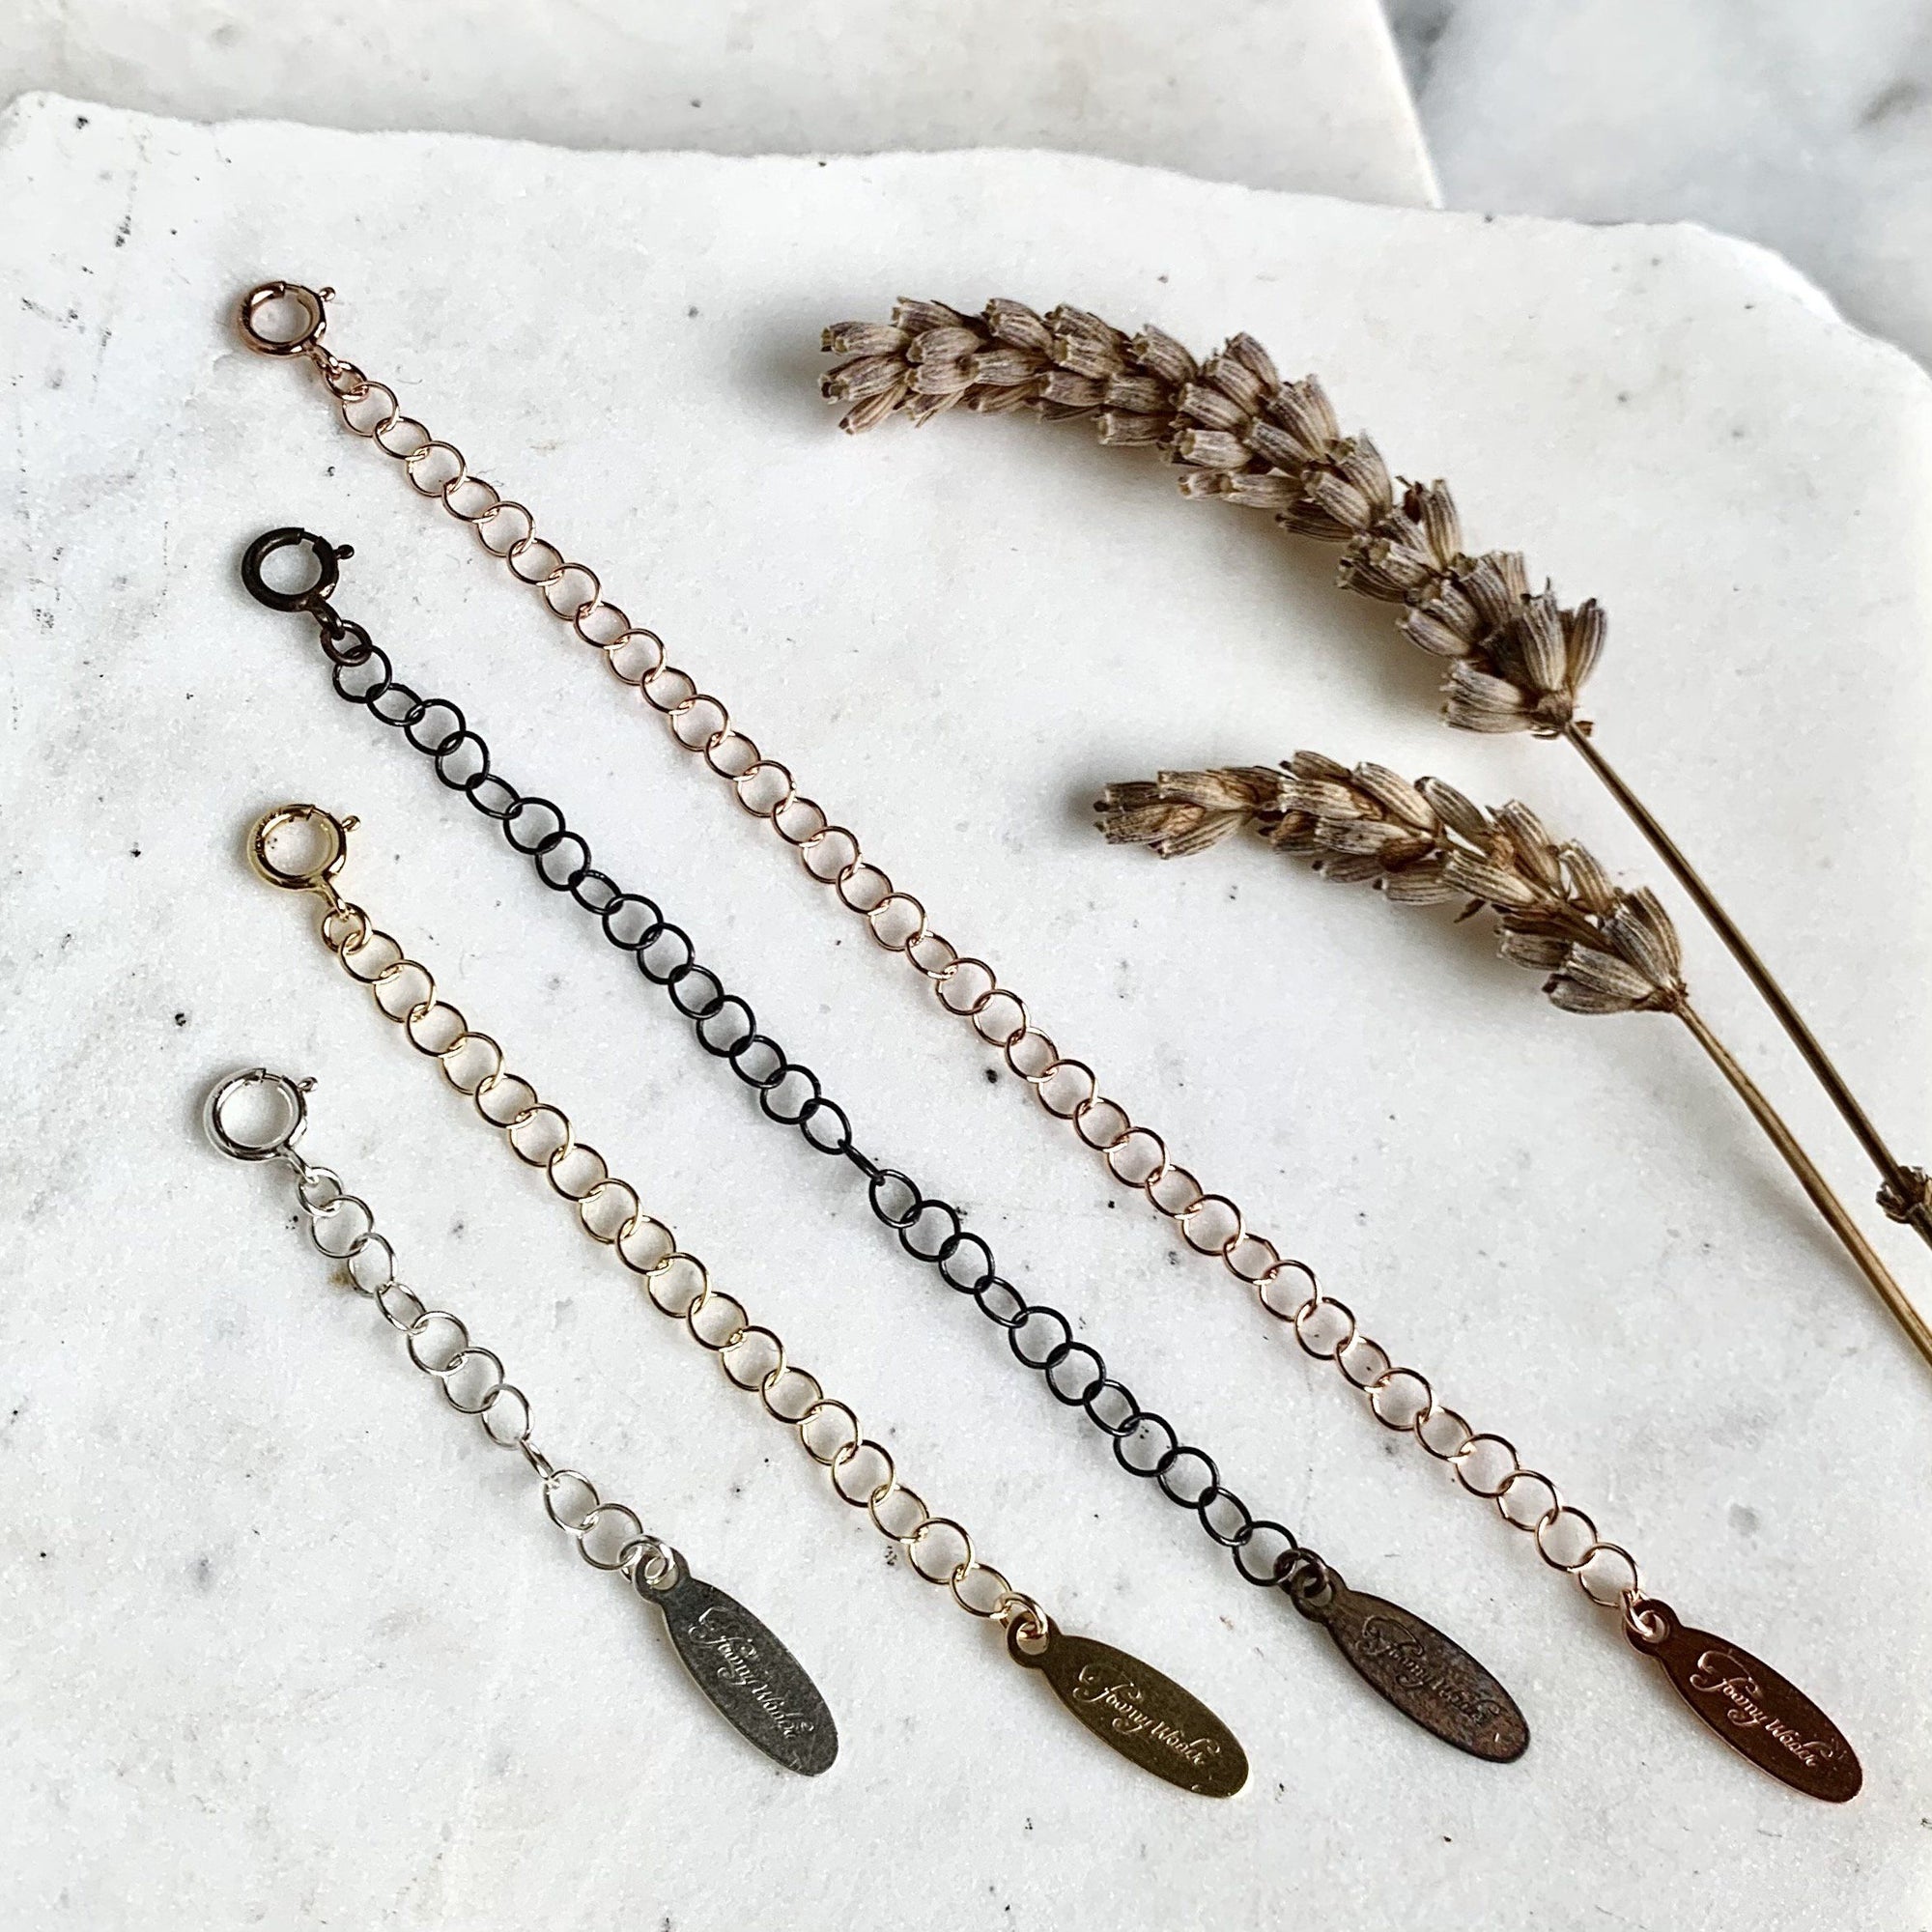 Necklace Extender - Any Length!